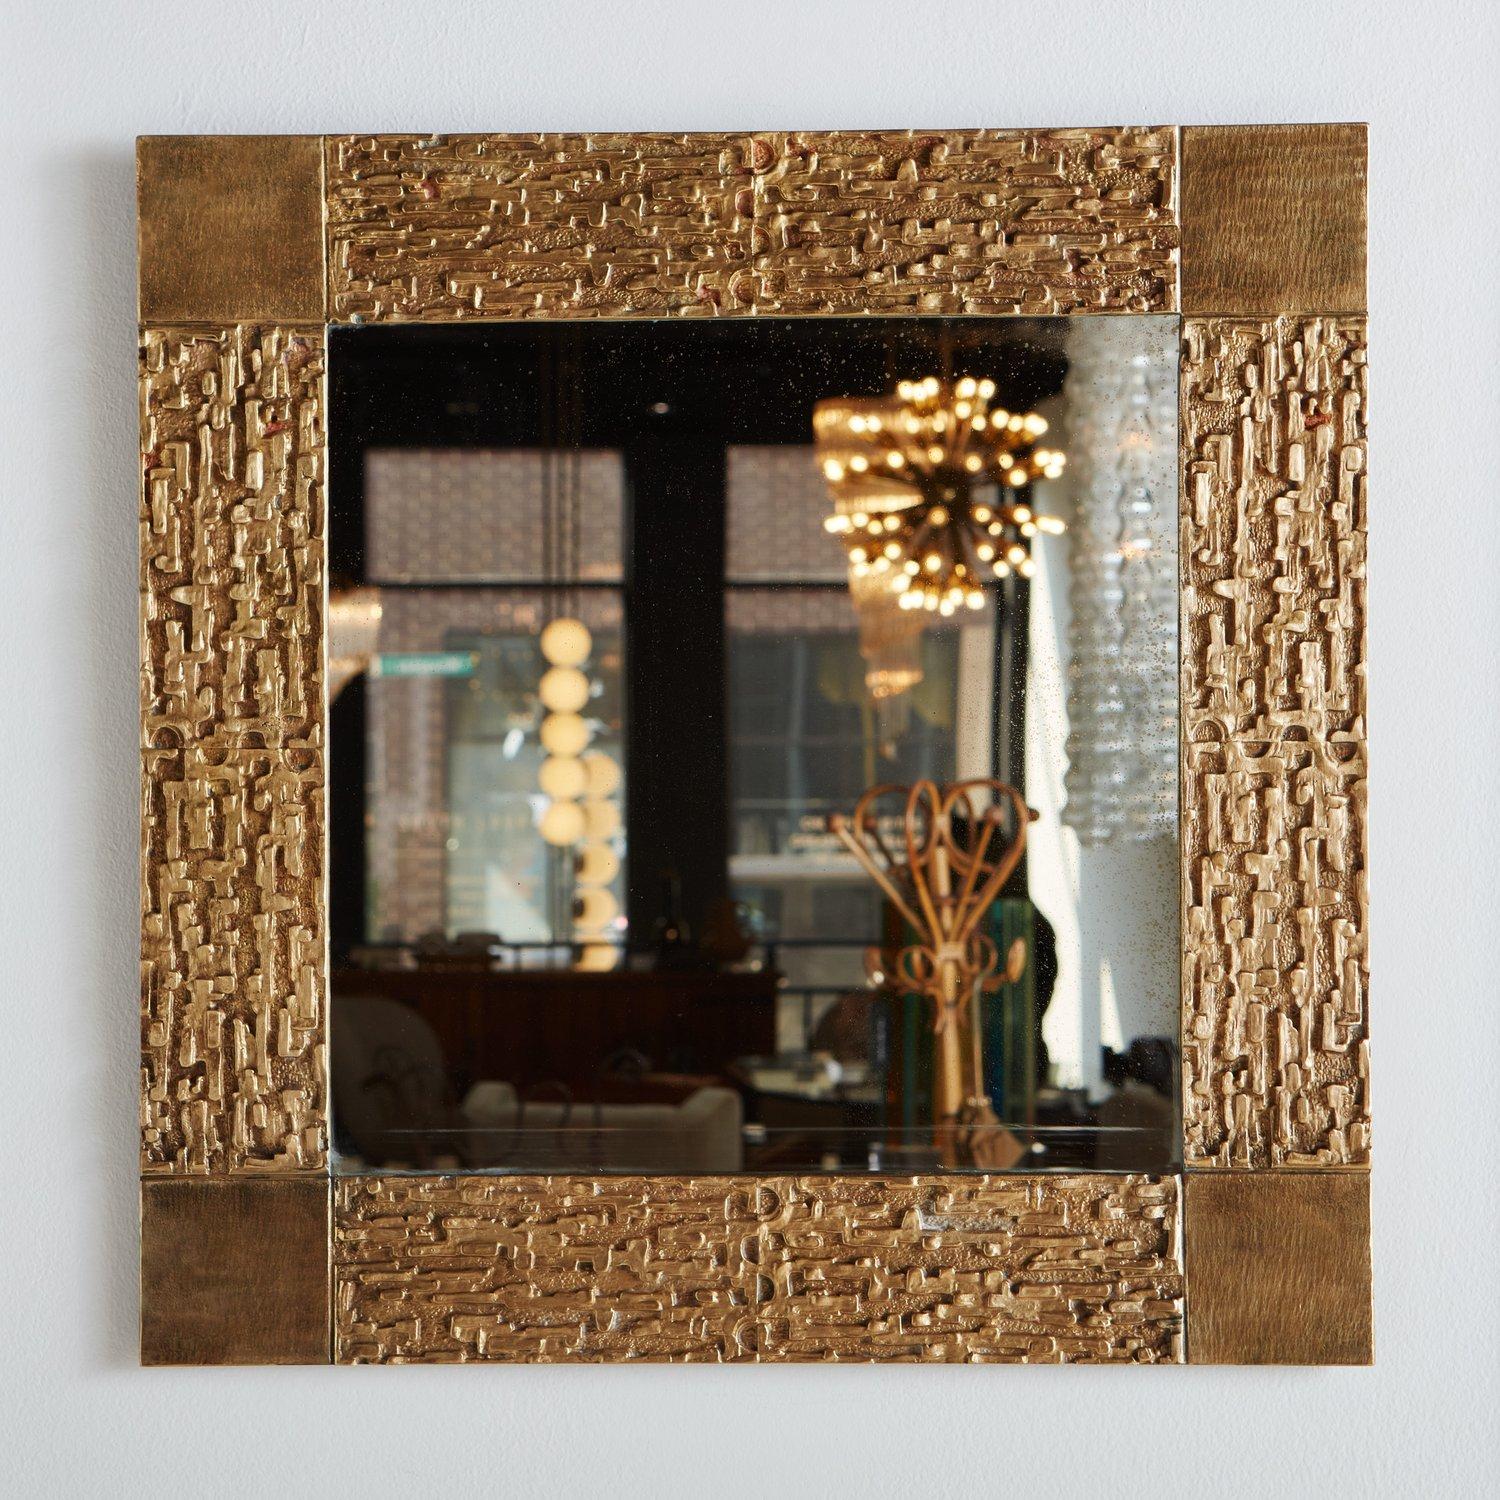 Mid-Century Modern Brutalist Square Brass Frame Mirror Attributed to Luciano Frigerio, Italy 1970s For Sale